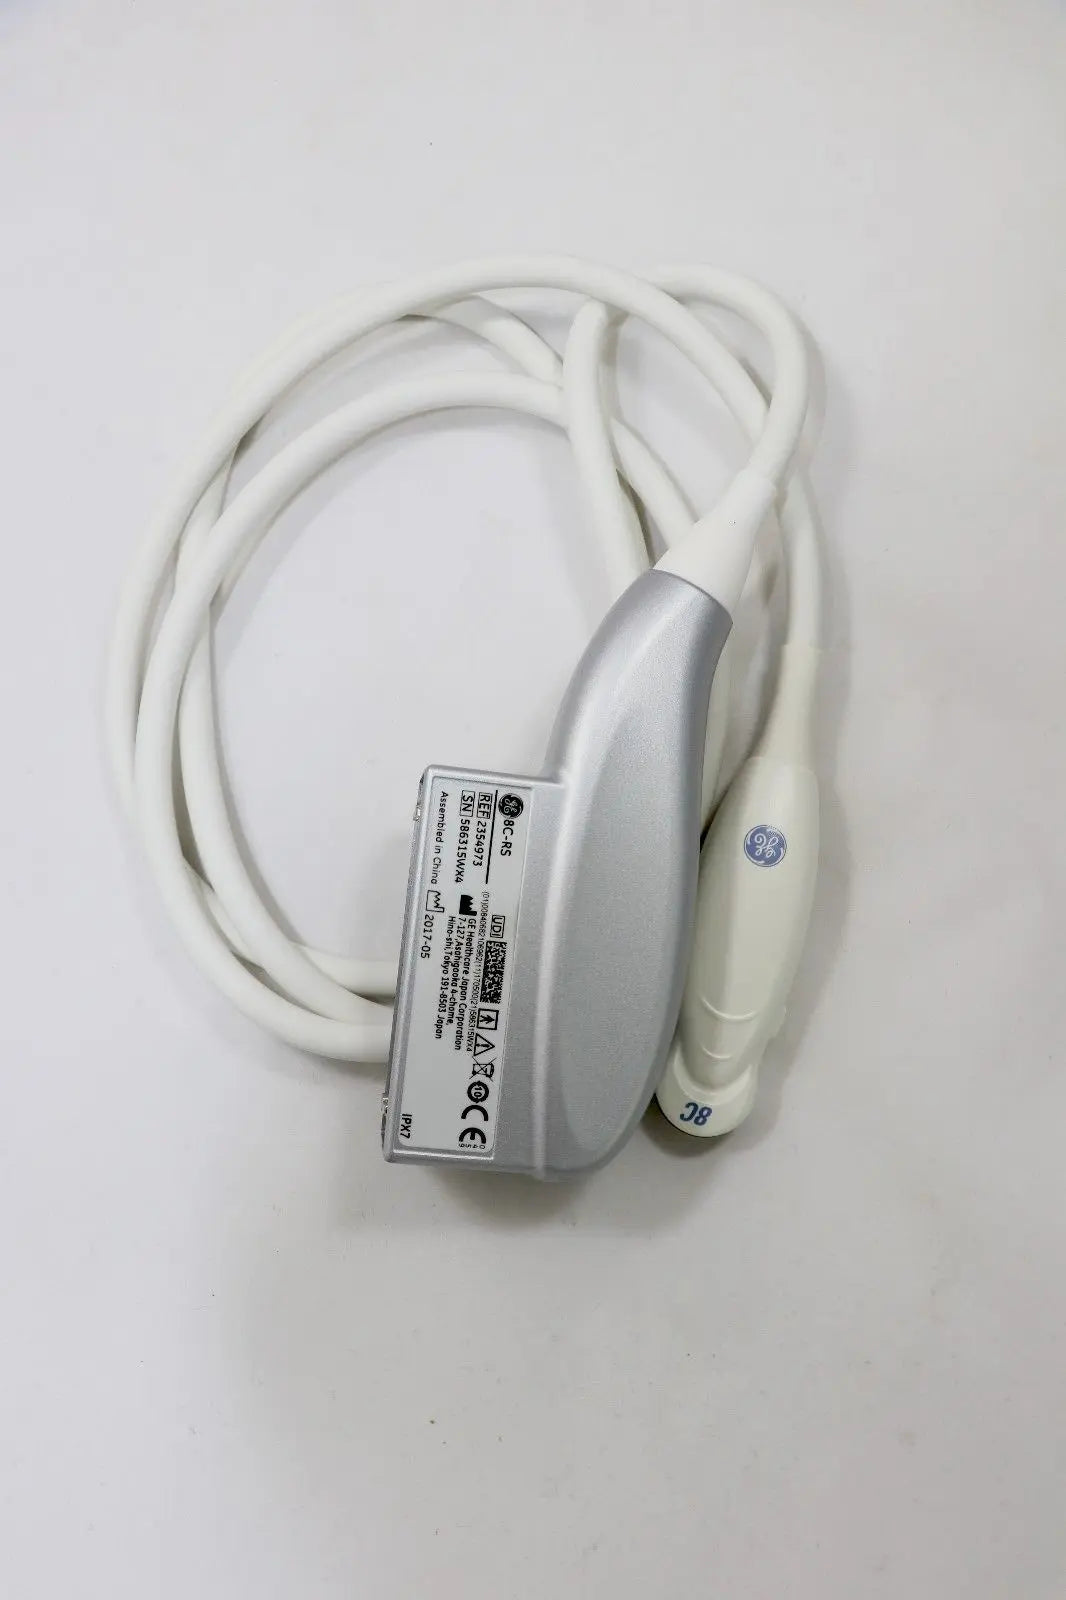 *New Open Box* GE 8C-RS Ultrasound Transducer DIAGNOSTIC ULTRASOUND MACHINES FOR SALE